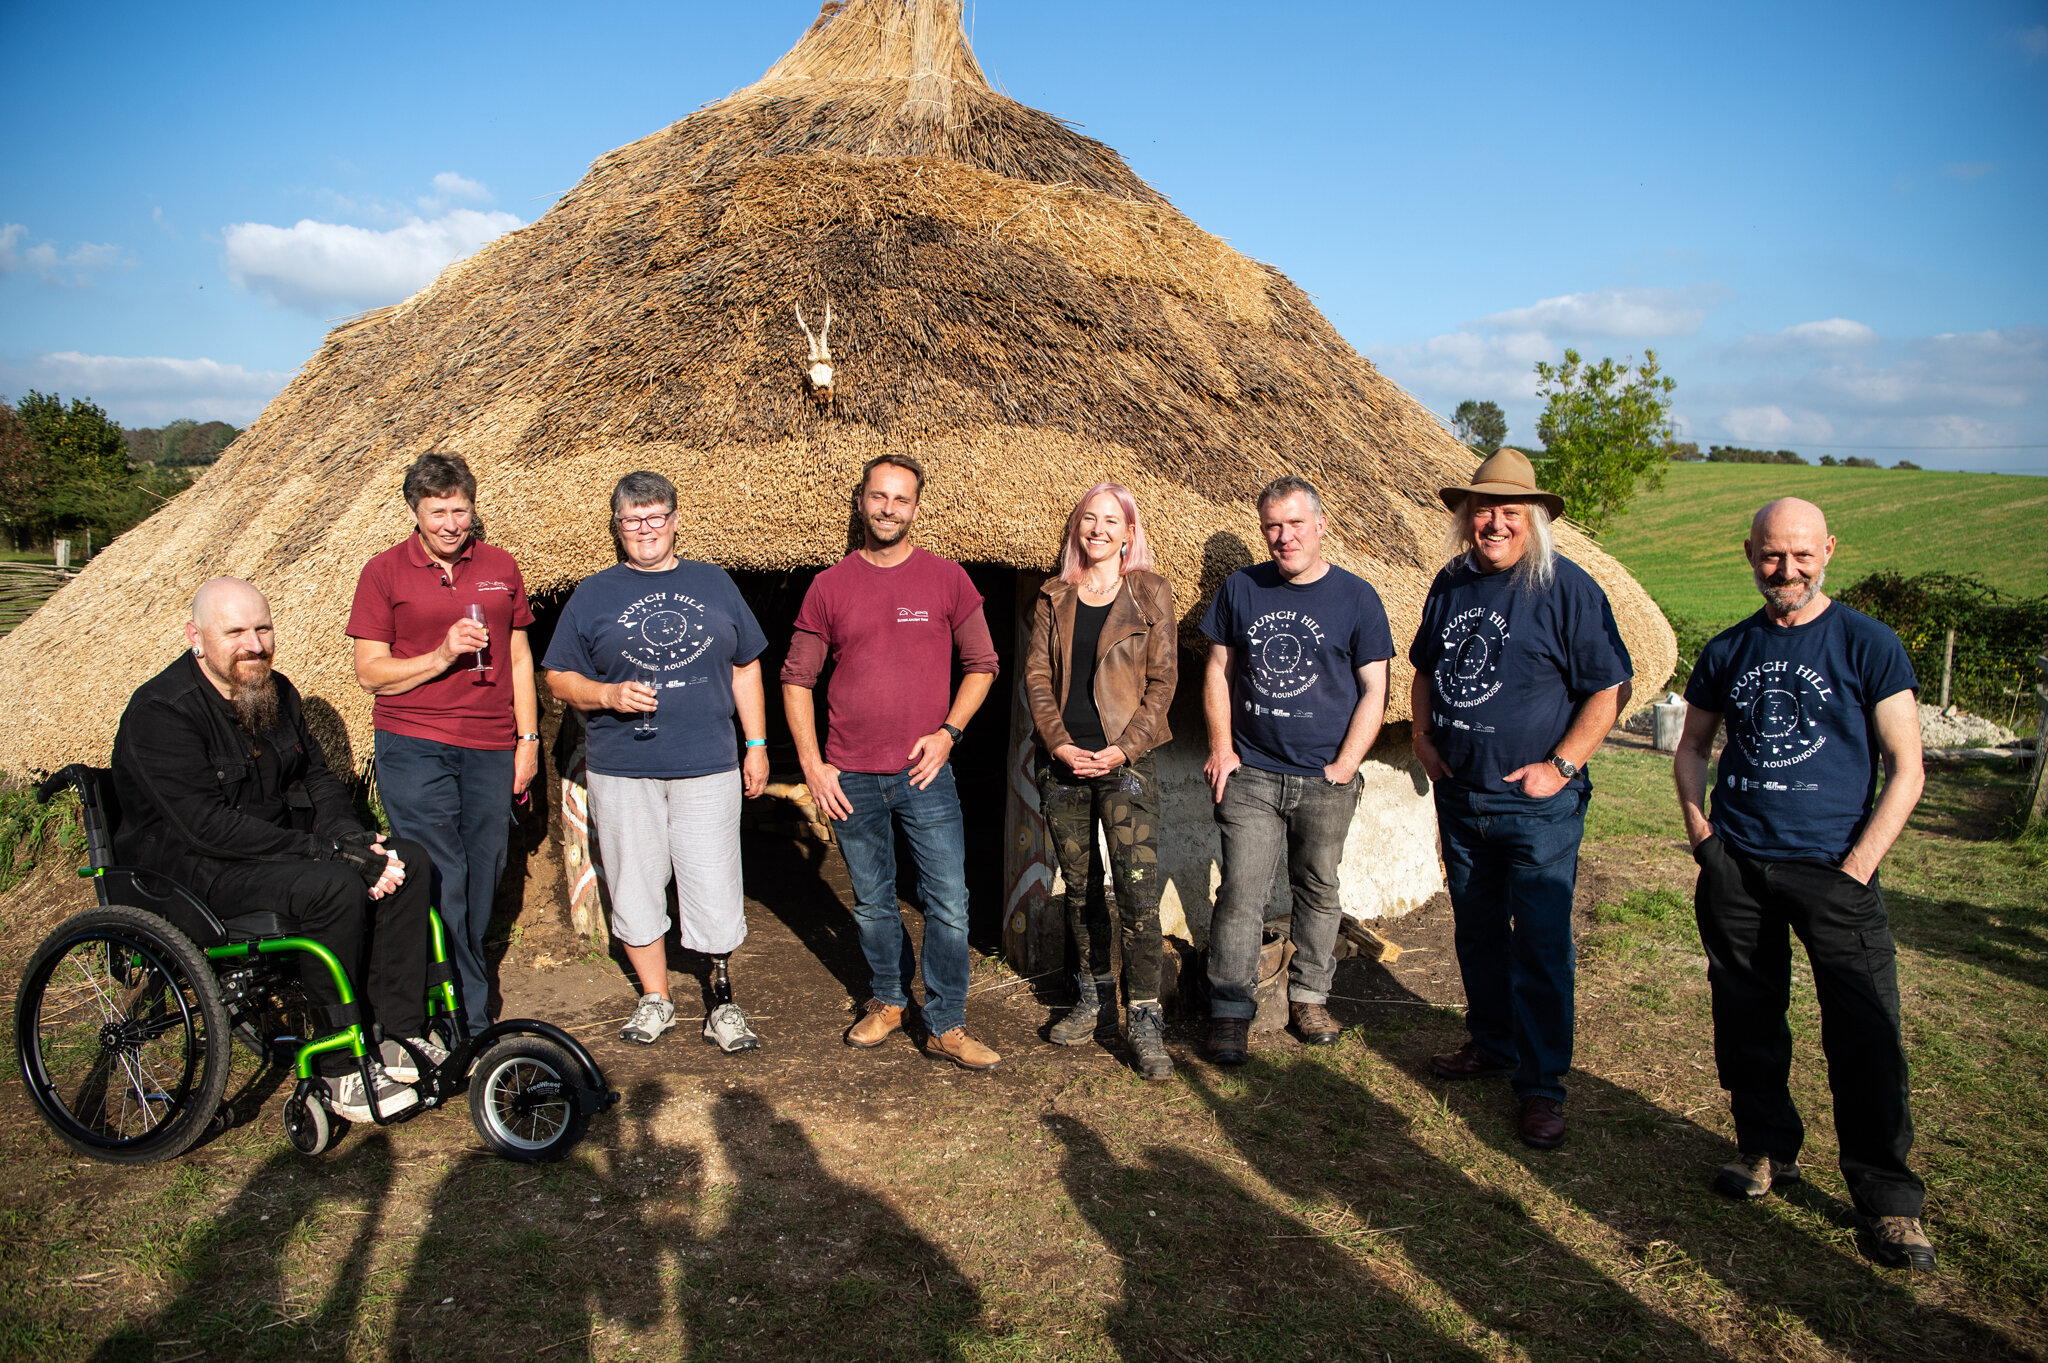 Professor Alice Roberts poses with Phil Harding, Richard Osgood, Stuart Prior, Elaine Corner from Step Together and the Butser Directors